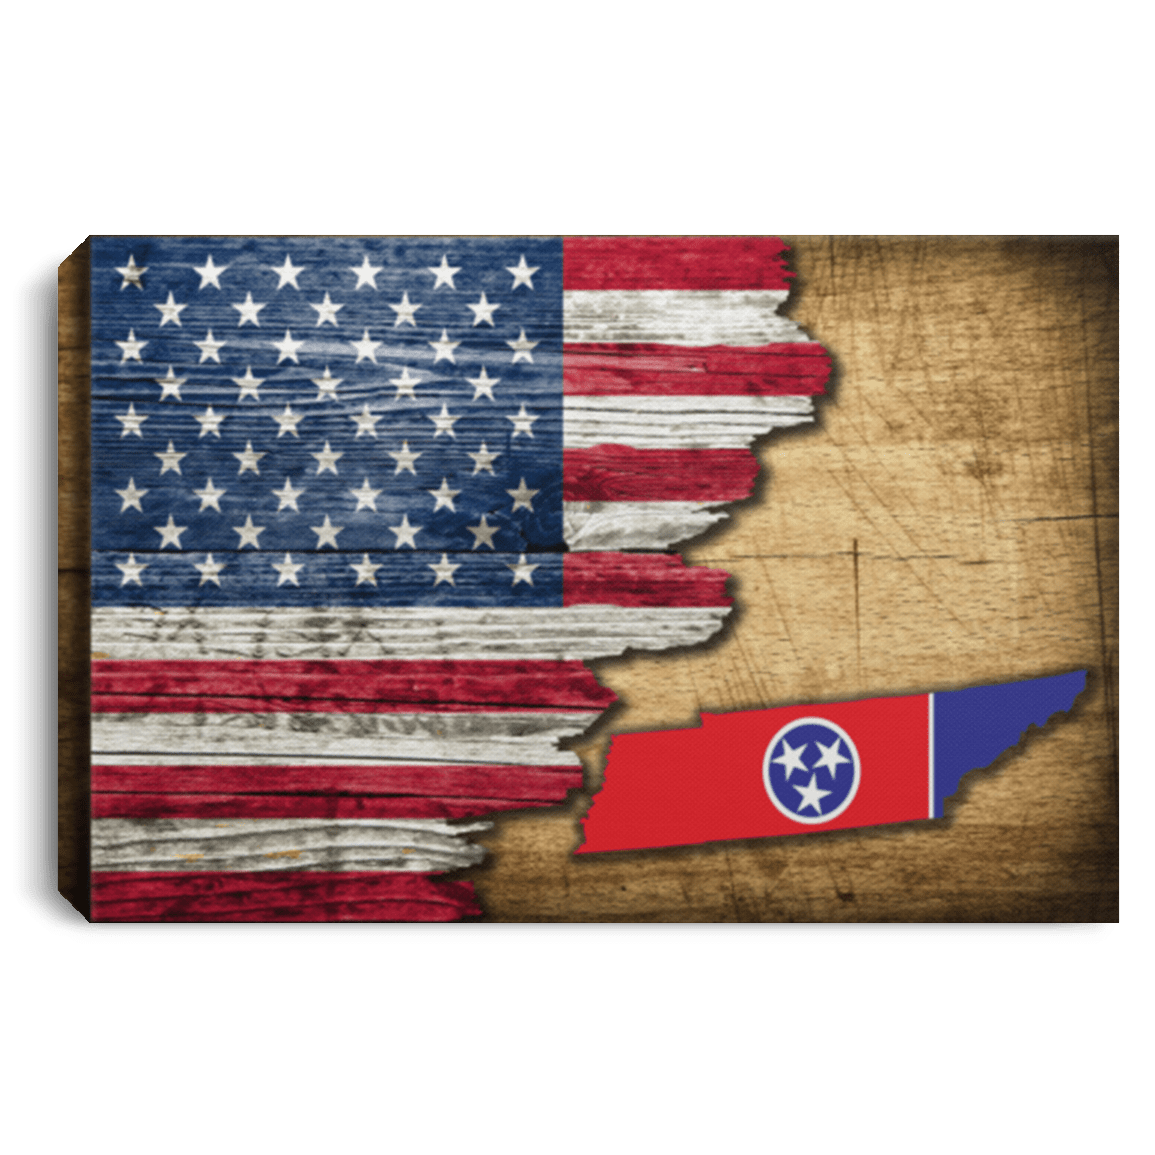 United States/Tennessee Flag Ripped Effect 12X8 Inches Landscape Canvas .75In Frame